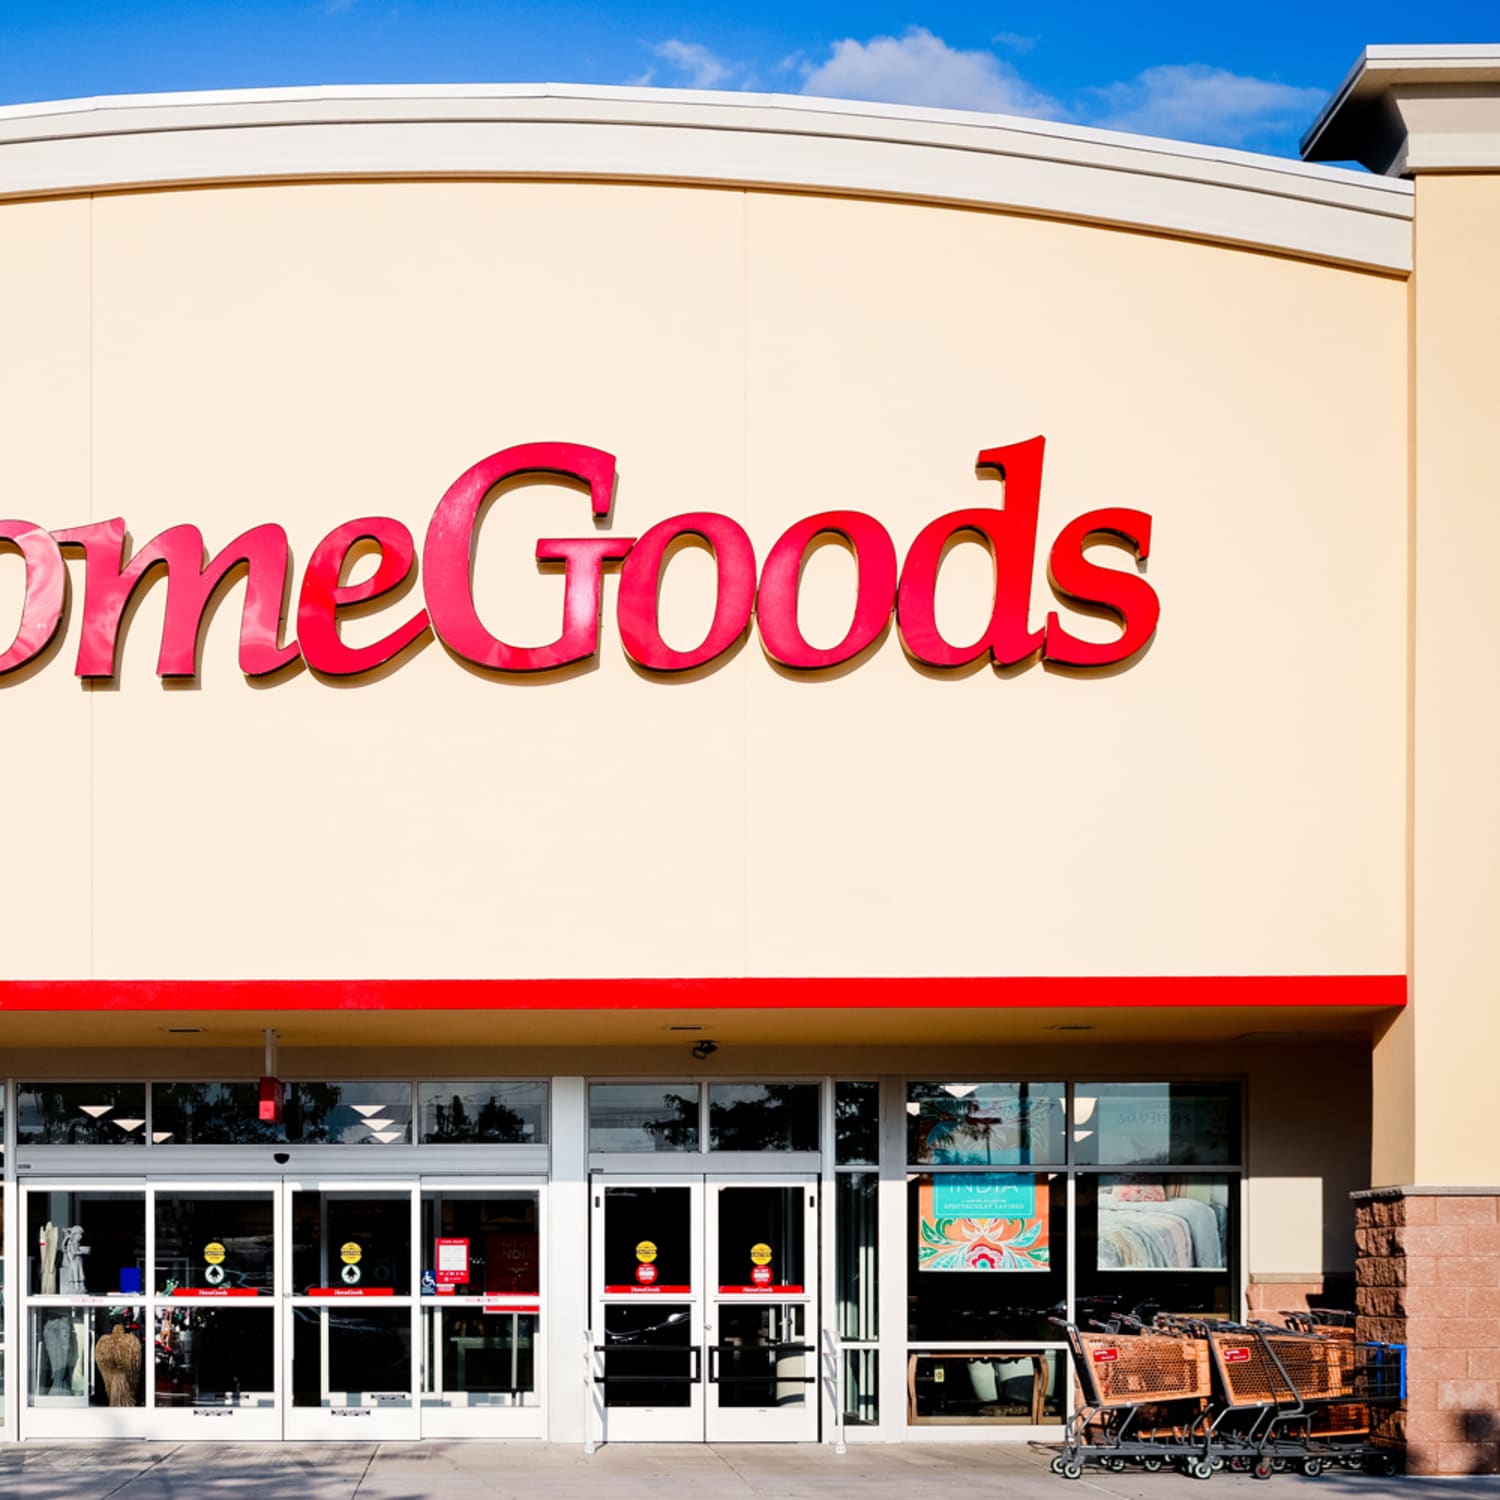 HomeGoods Online Shopping and Ordering Details - Can You Shop